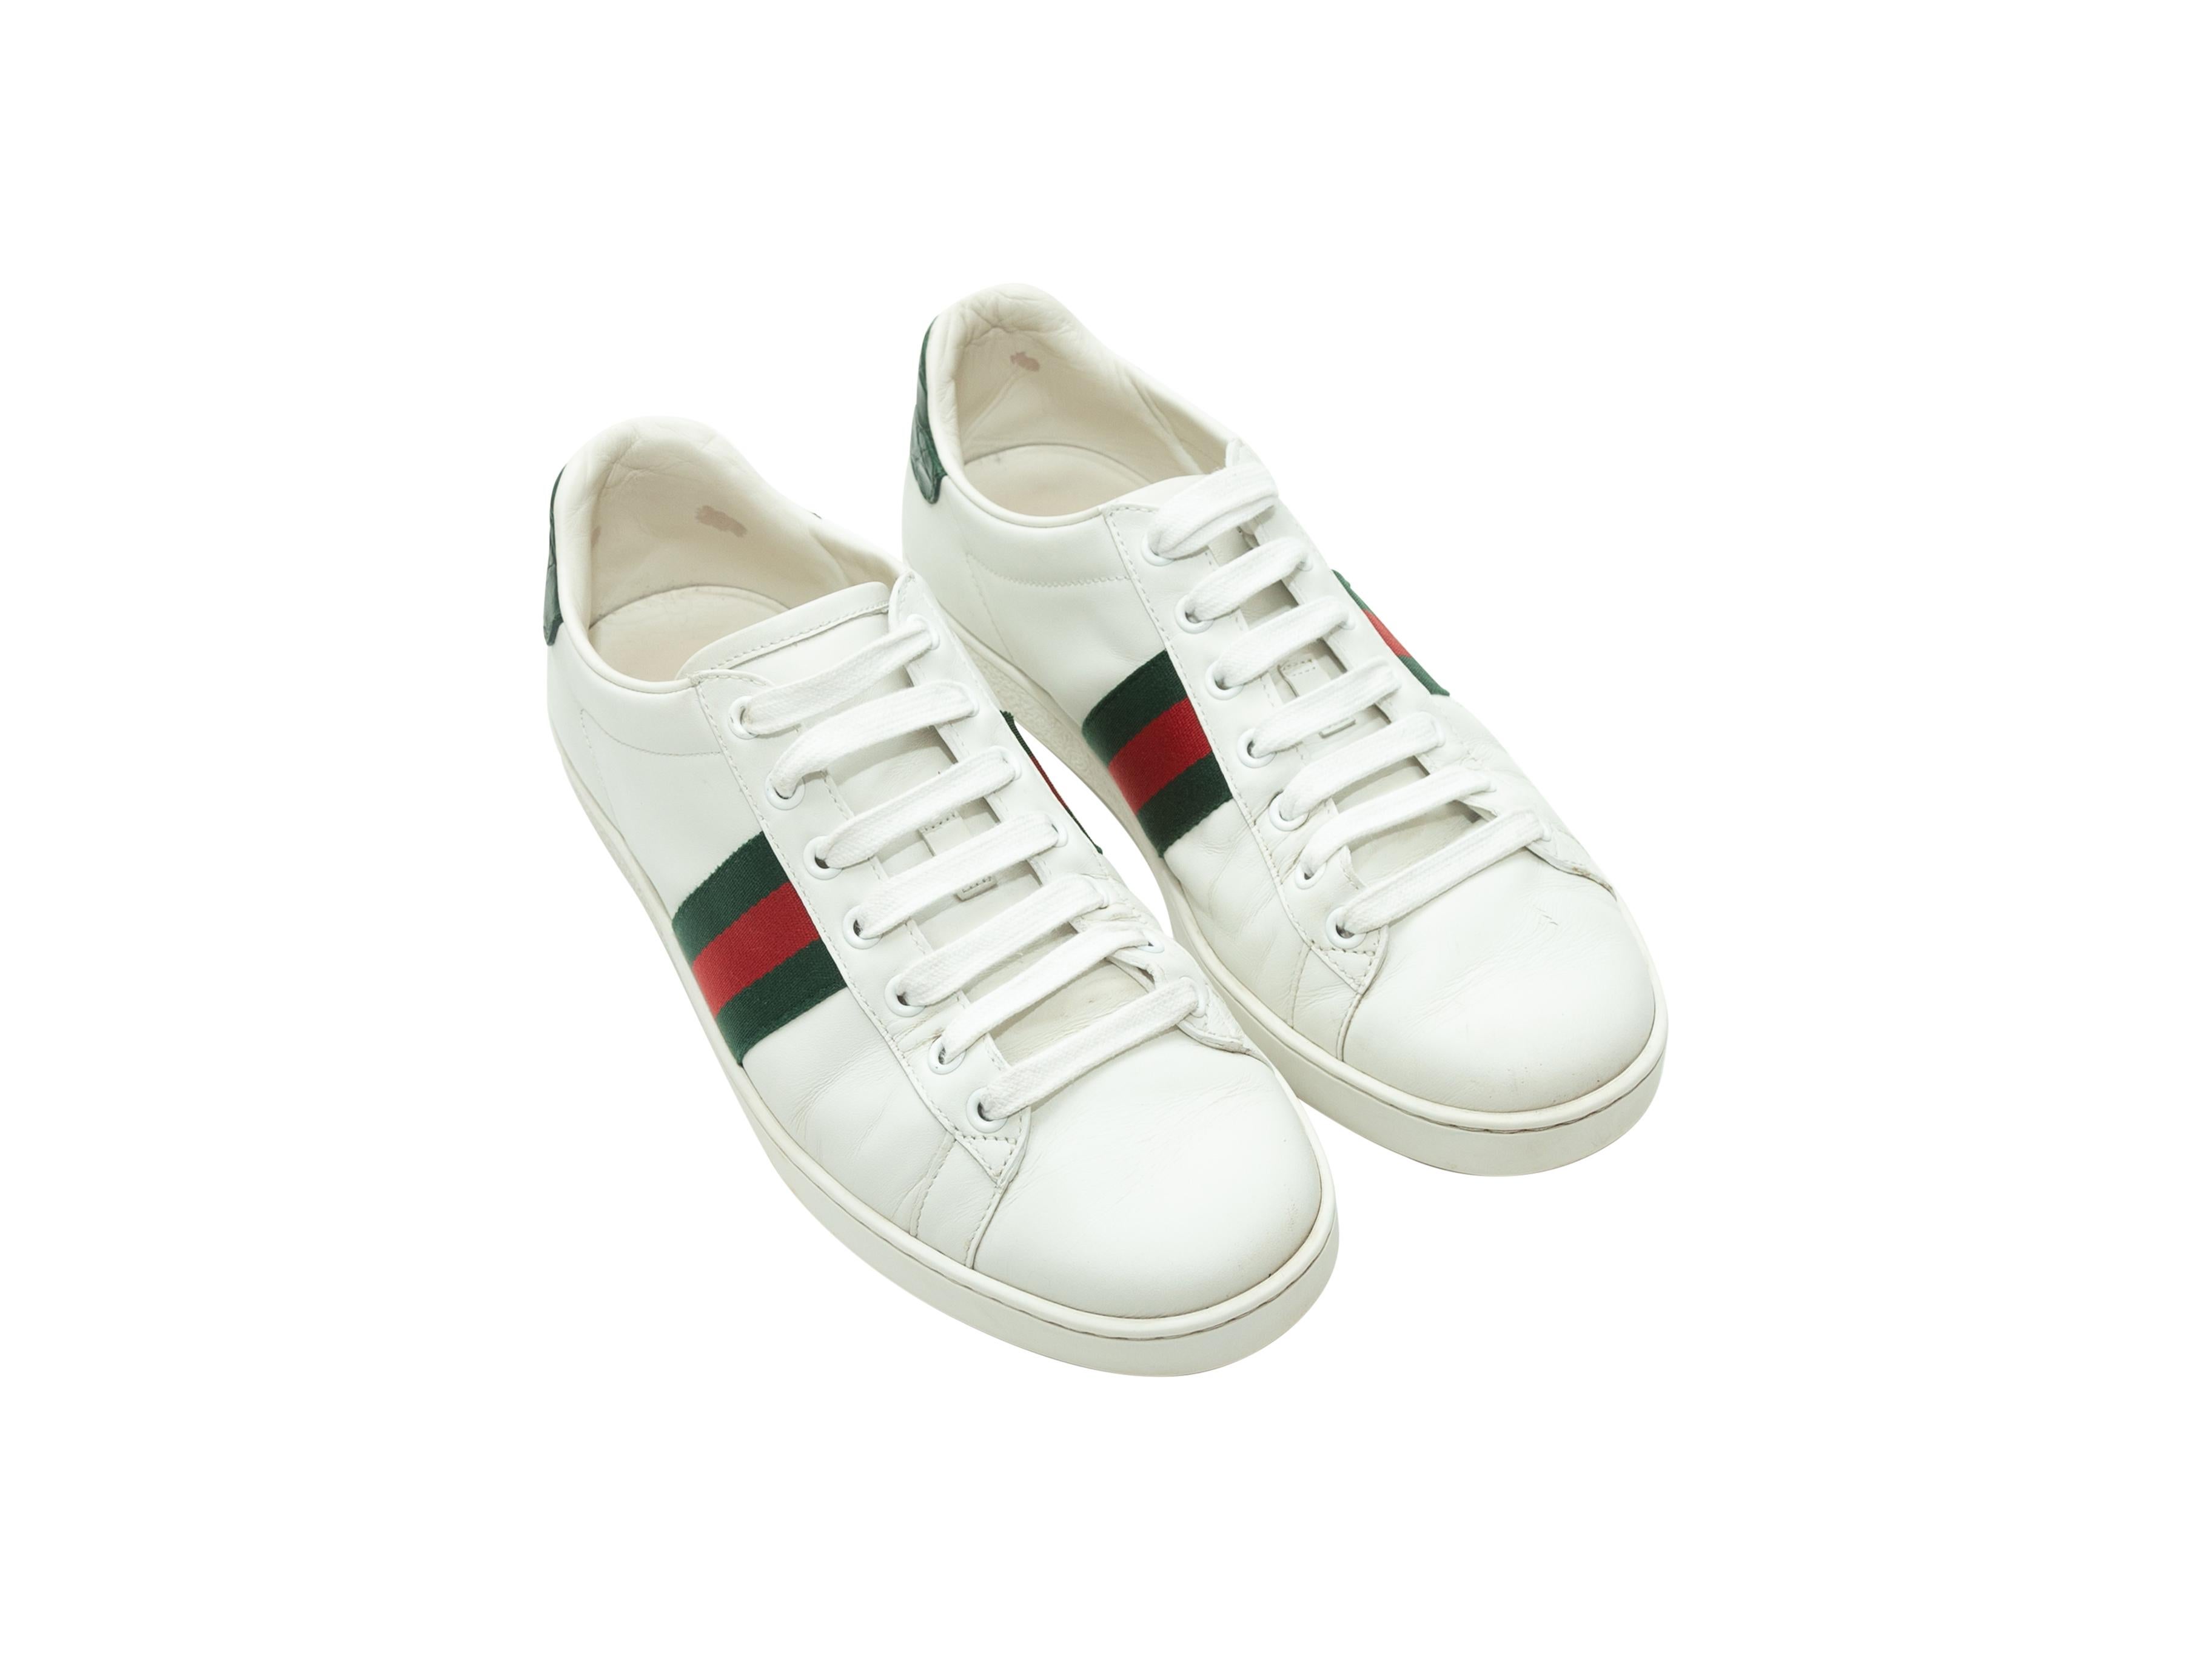 Product details: White leather low-top sneakers by Gucci. Green and red Gucci Web trim at sides. Crocodile accent panels at backs. Lace-up tie closures at tops. Designer size 40.
Condition: Pre-owned. Good. Scuffing at leather. Marks and wear at